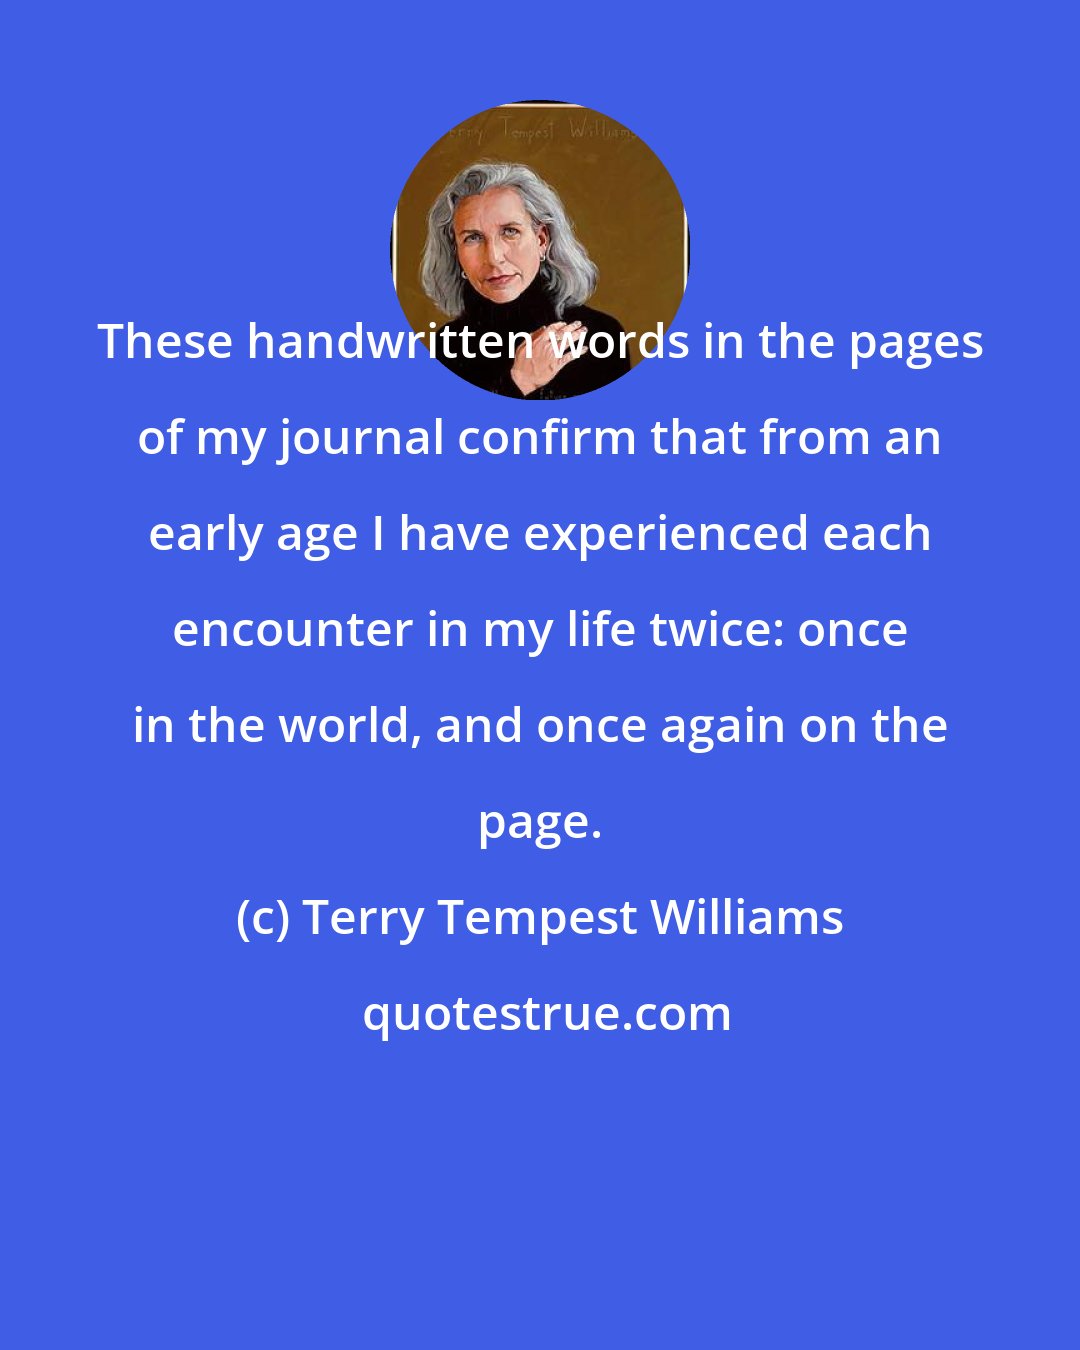 Terry Tempest Williams: These handwritten words in the pages of my journal confirm that from an early age I have experienced each encounter in my life twice: once in the world, and once again on the page.